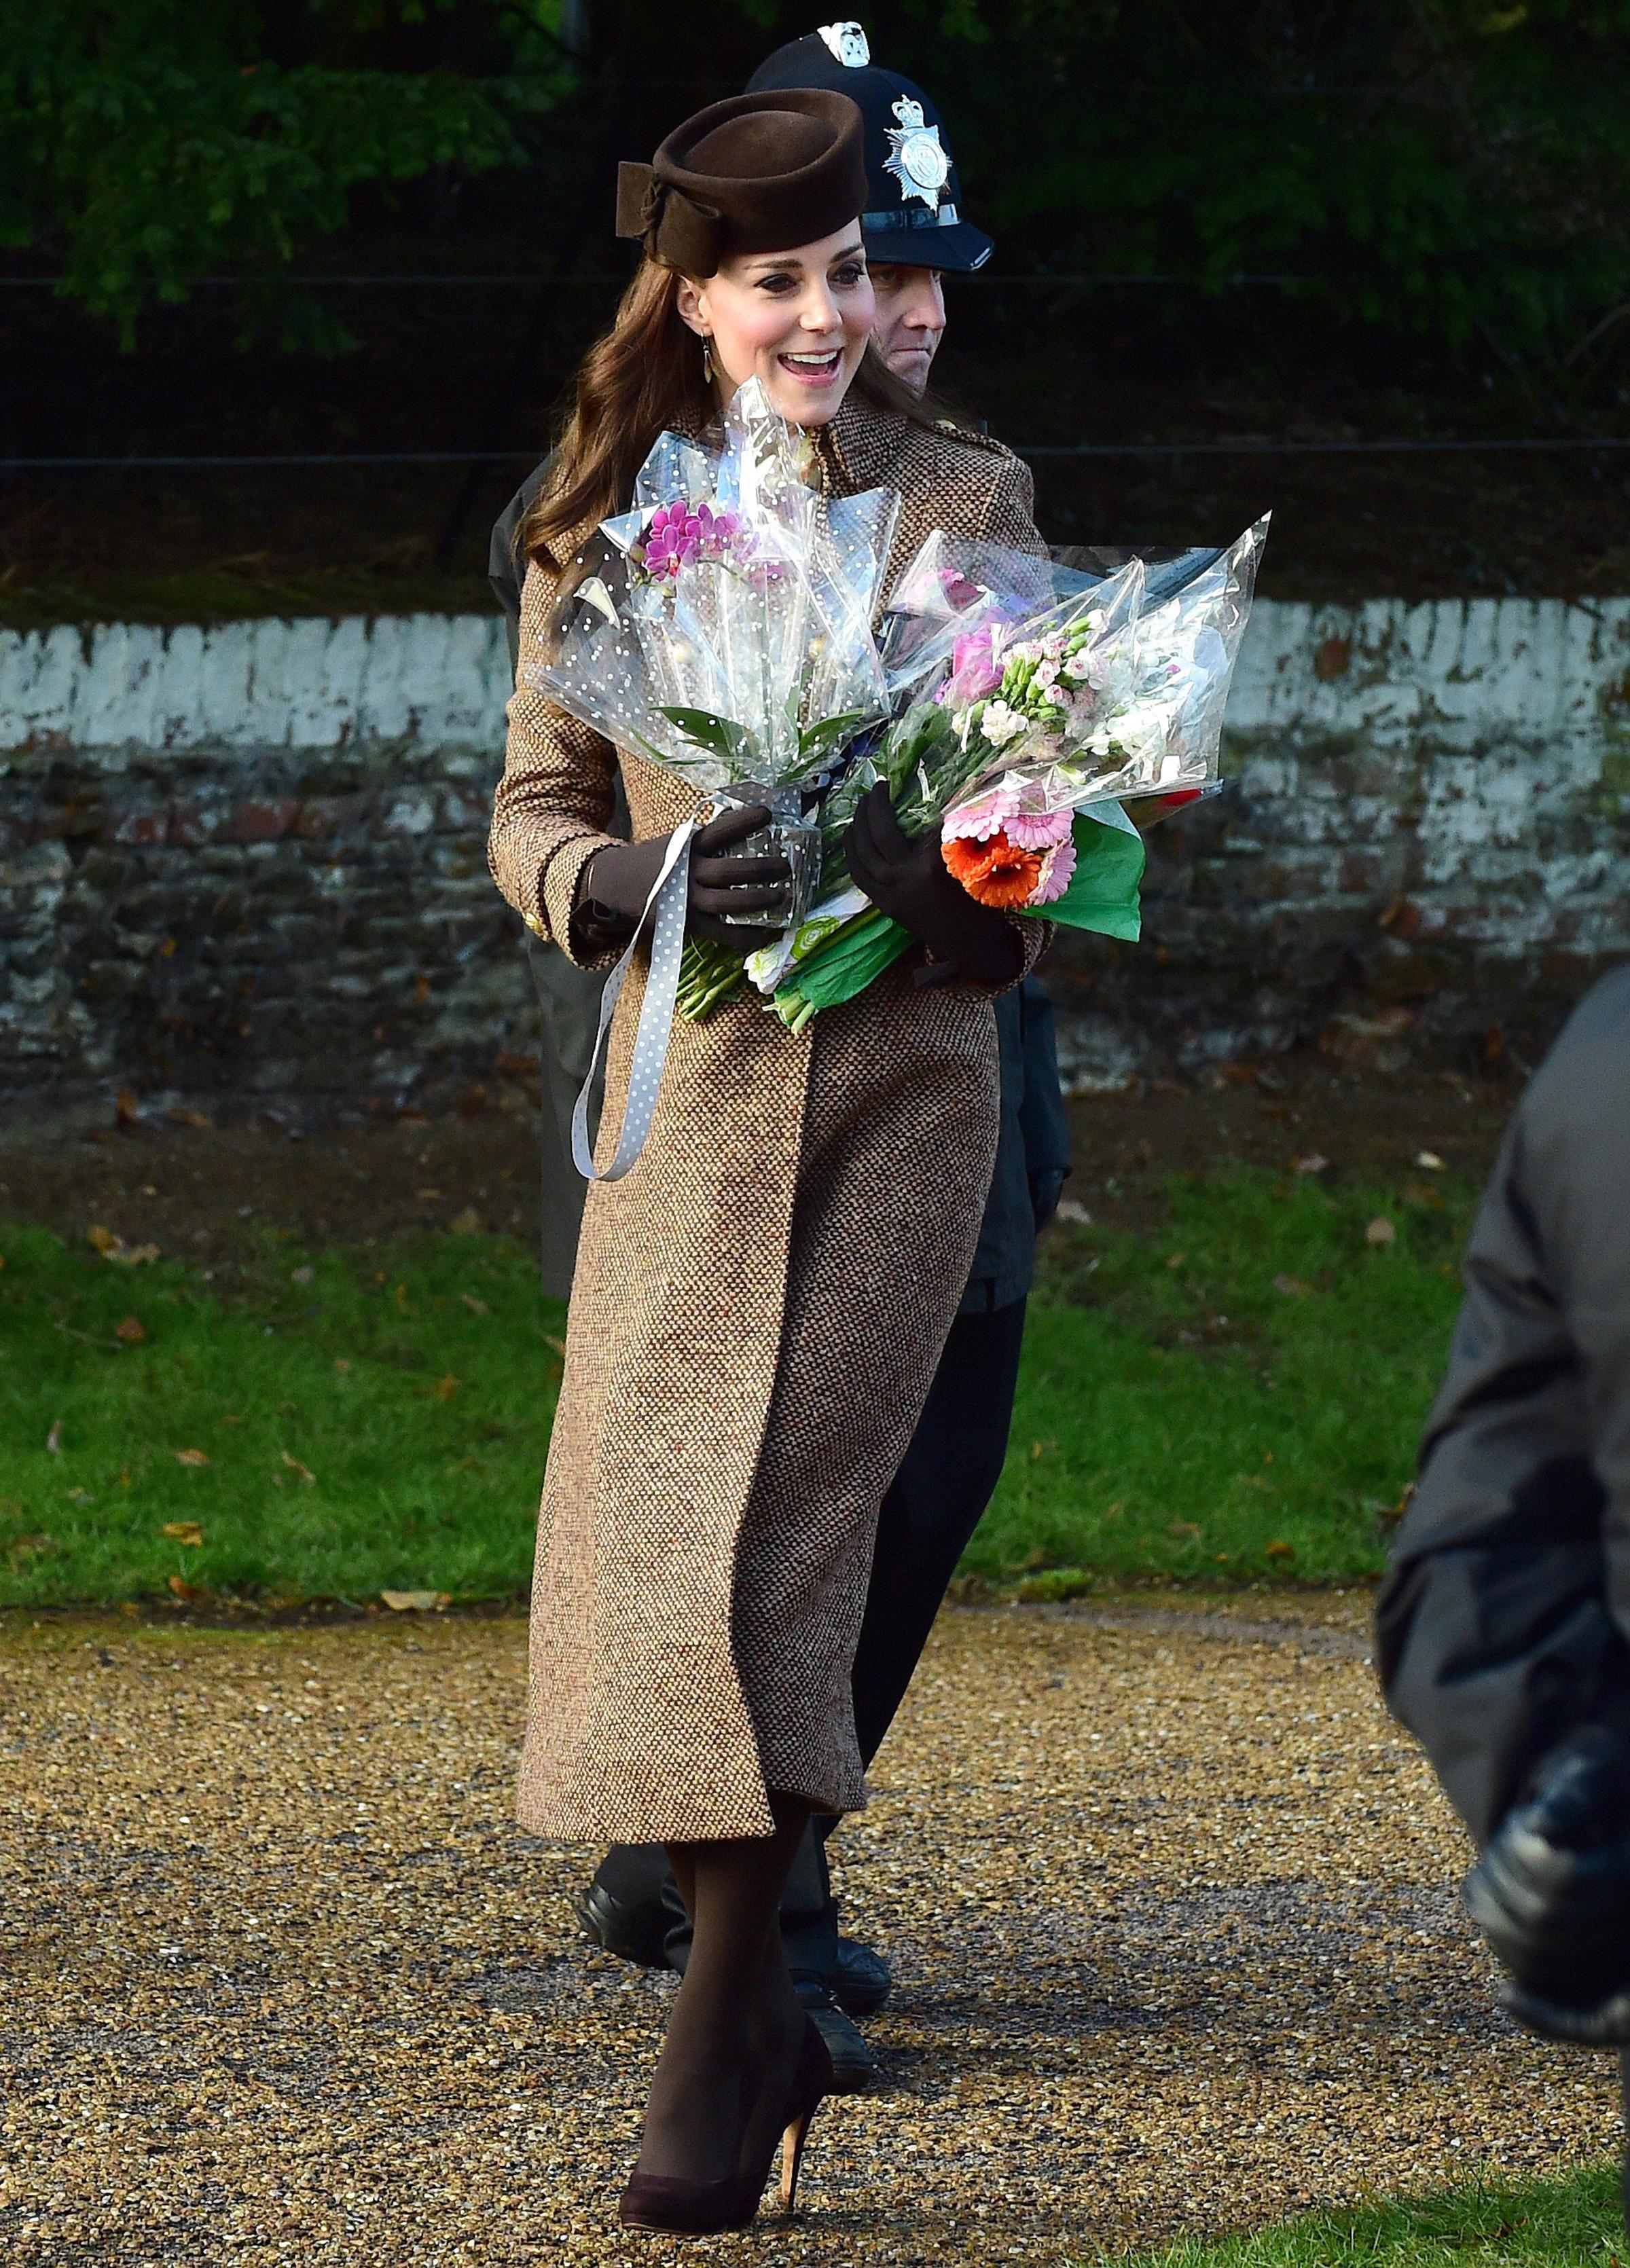 Britain's Catherine, Duchess of Cambridge, receives flowers from well-wishers after attending with other members of the royal family the traditional Christmas Day Church Service at Sandringham in eastern England, on Dec. 25, 2014.